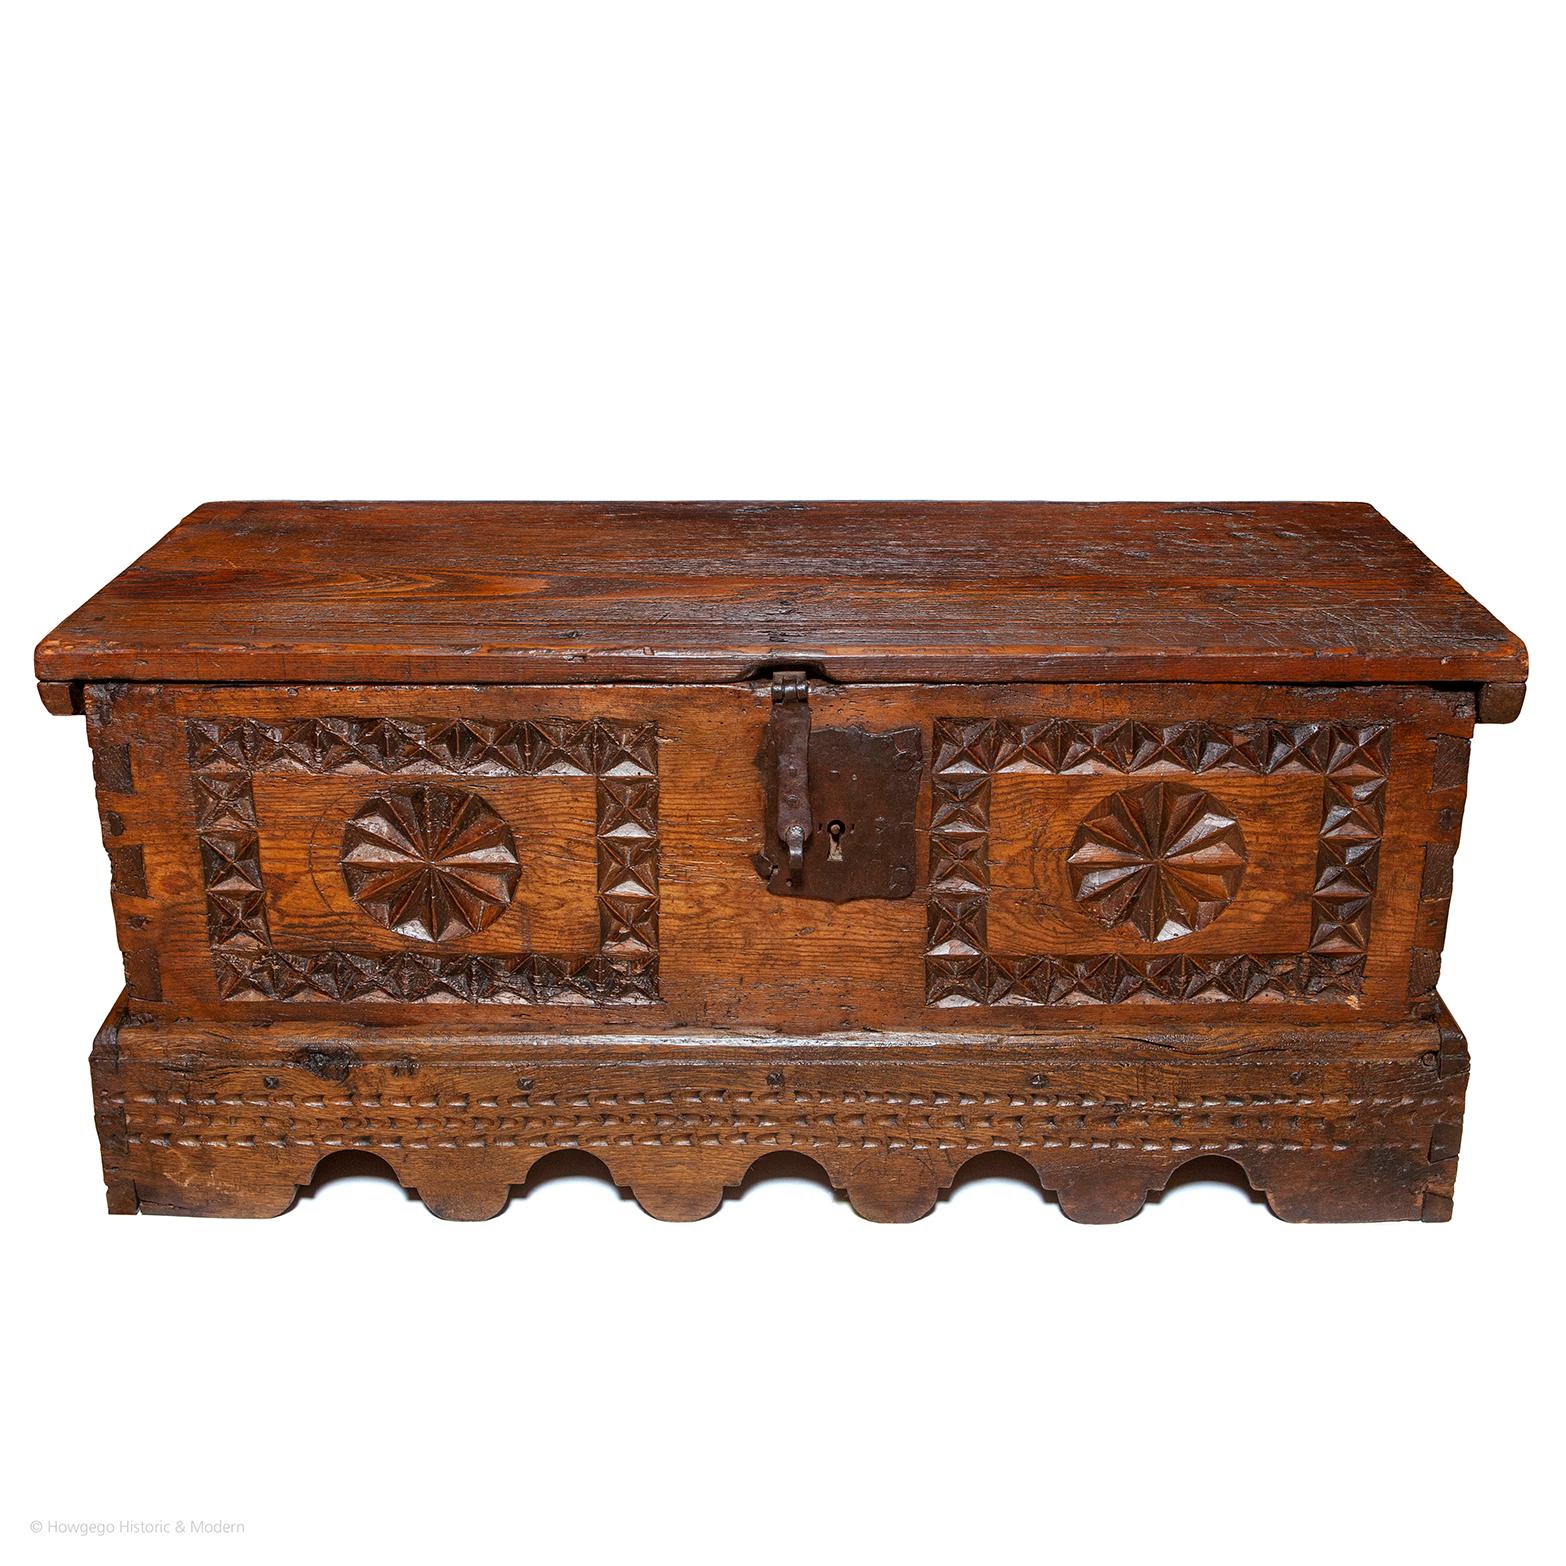 - Rare small size, would work as a sofa or low table with the advantage of storage space
- Characterful chip carving, ironwork and figuring injecting atmosphere into any interior
- Warm, rich, lustrous color and patina.

Single plank top with